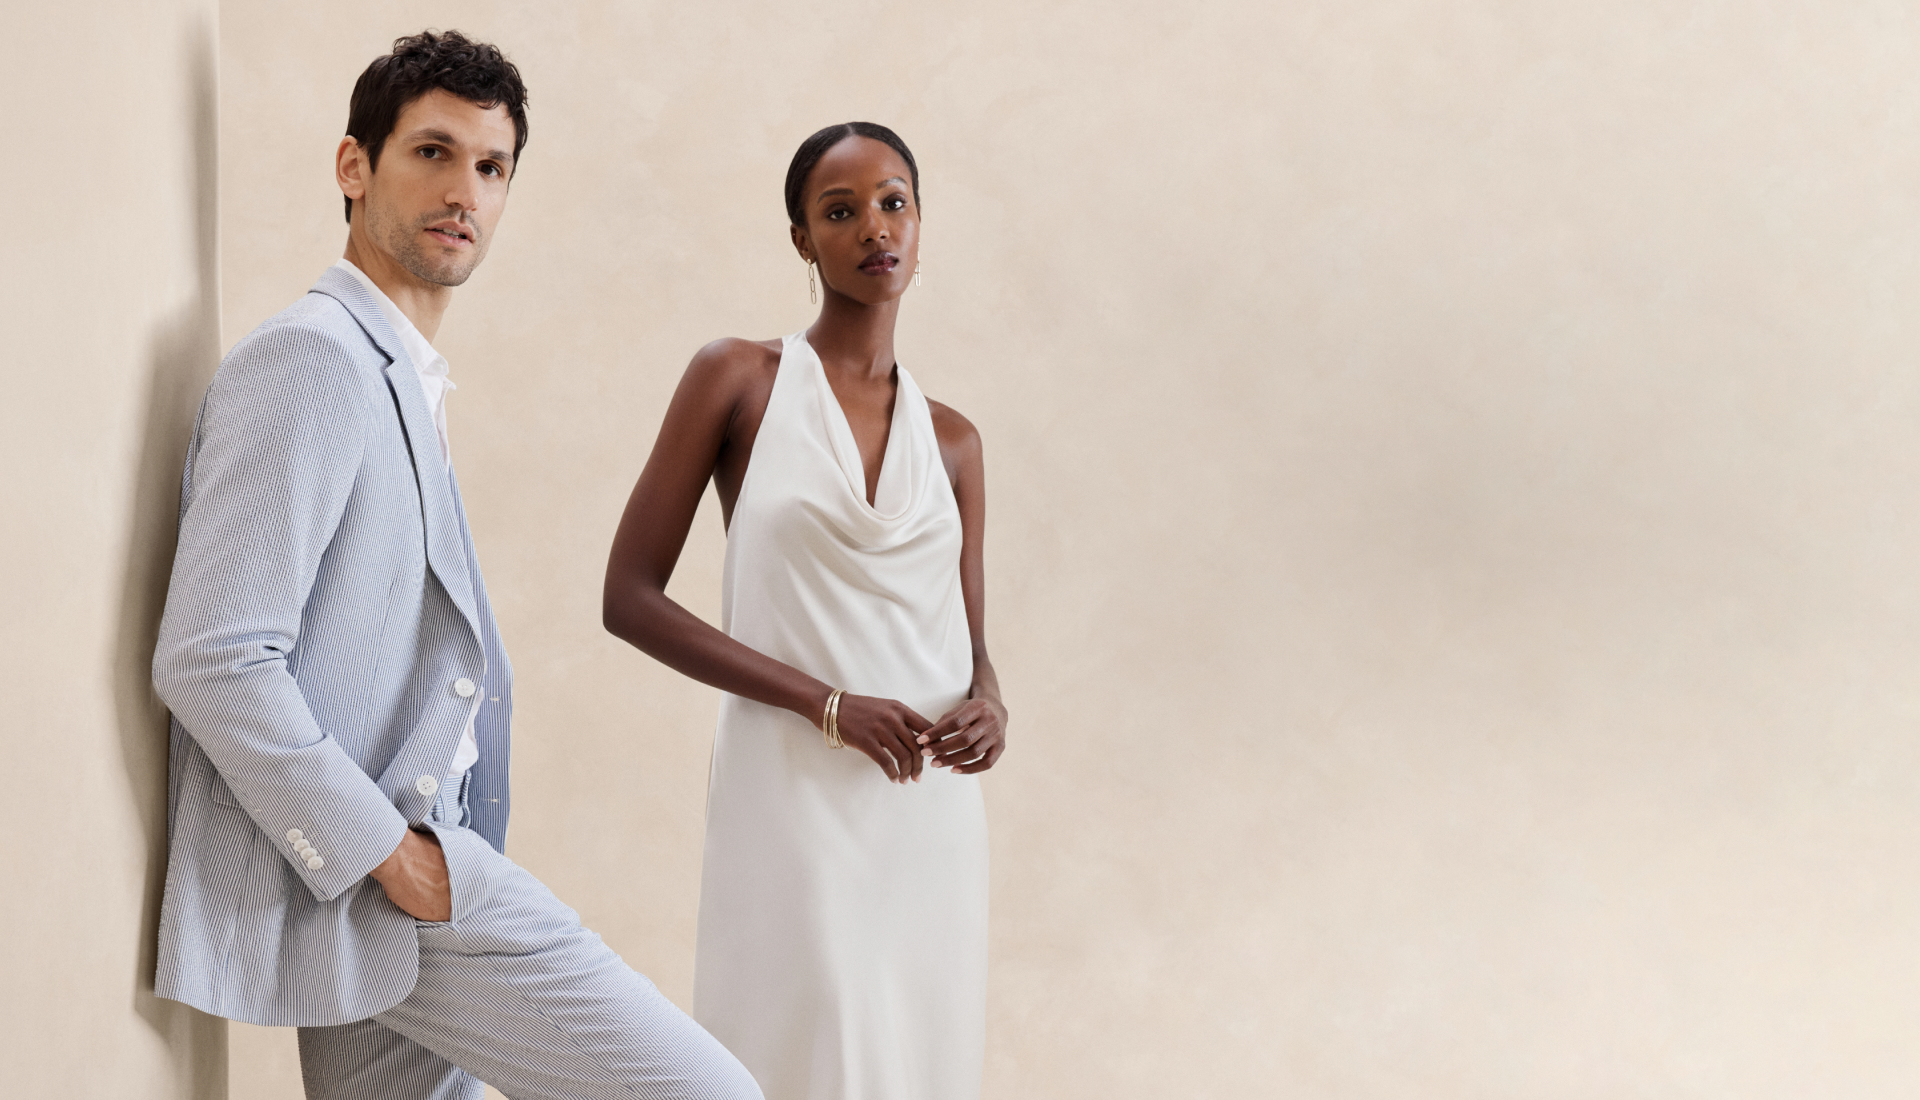 Summer Celebrations. Seersucker suits to satin dresses — explore elevated styles tailor-made for special occasions.